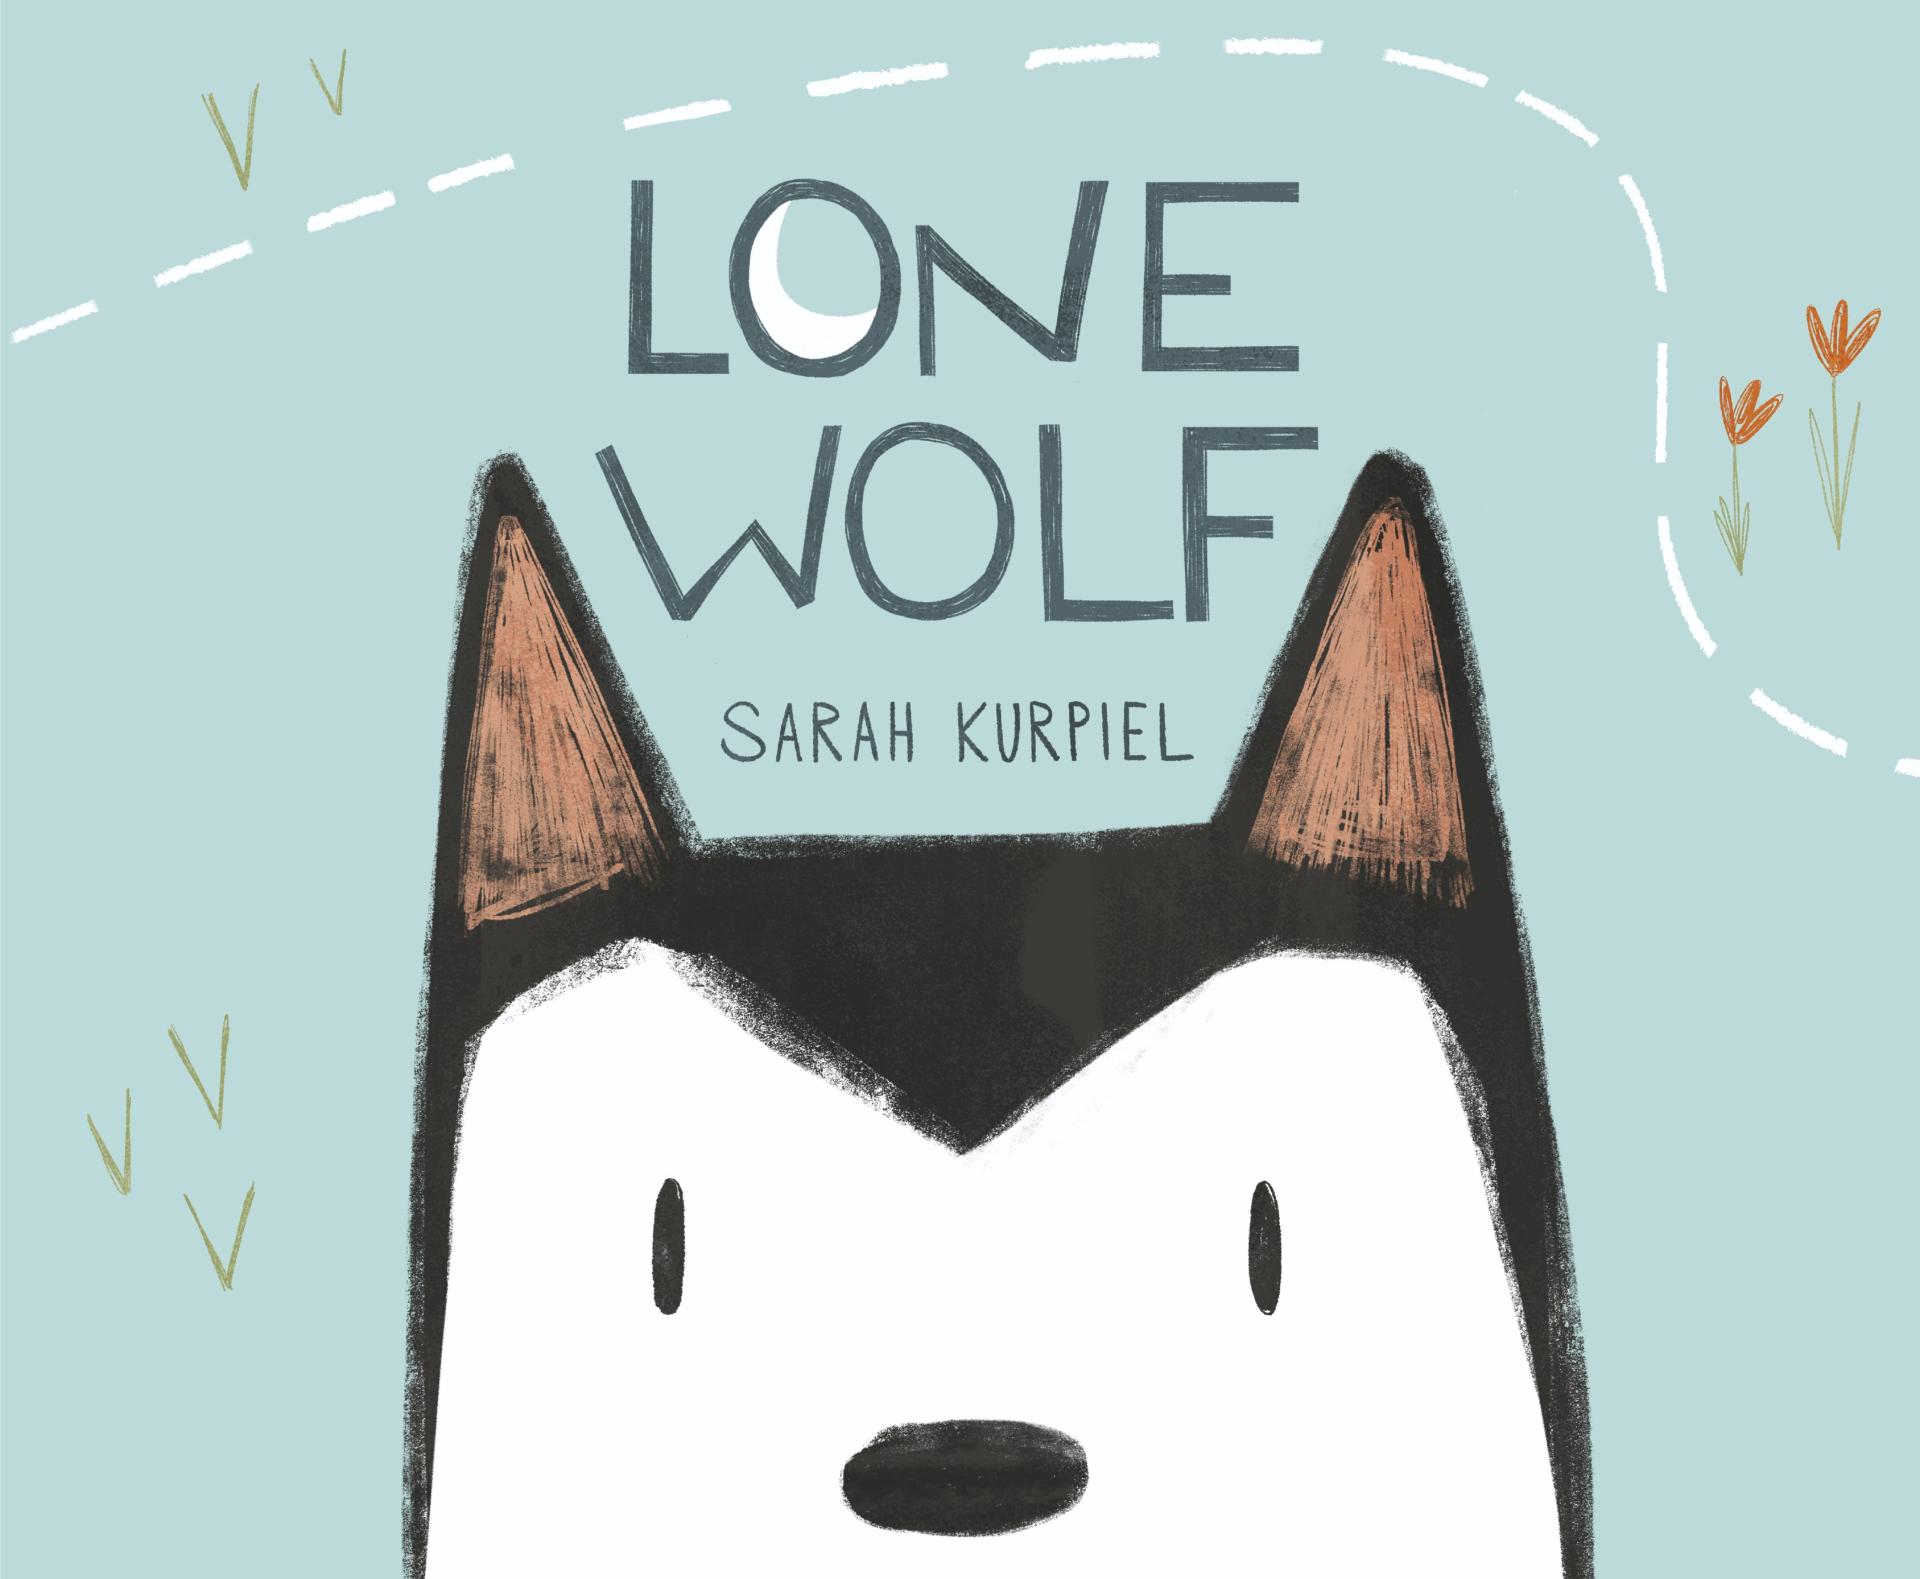 The cover of the book Lone Wolf.